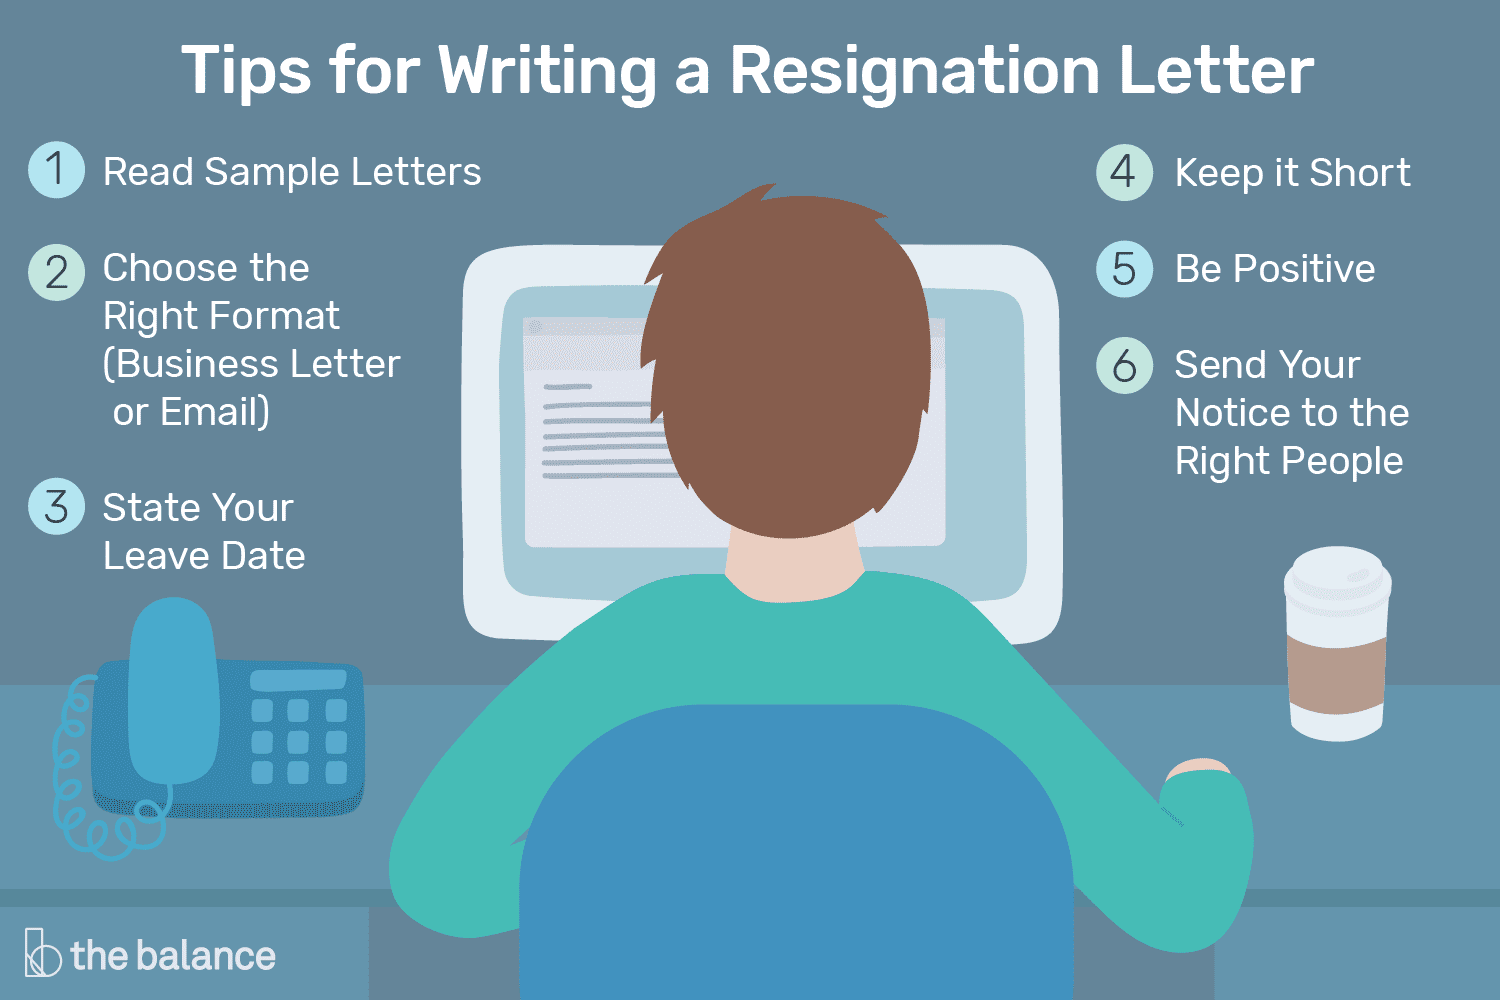 Two Week Notice Template: Use This Sample Letter As A Guide To Draft A Formal Two Week Notice Of Resignation Letter